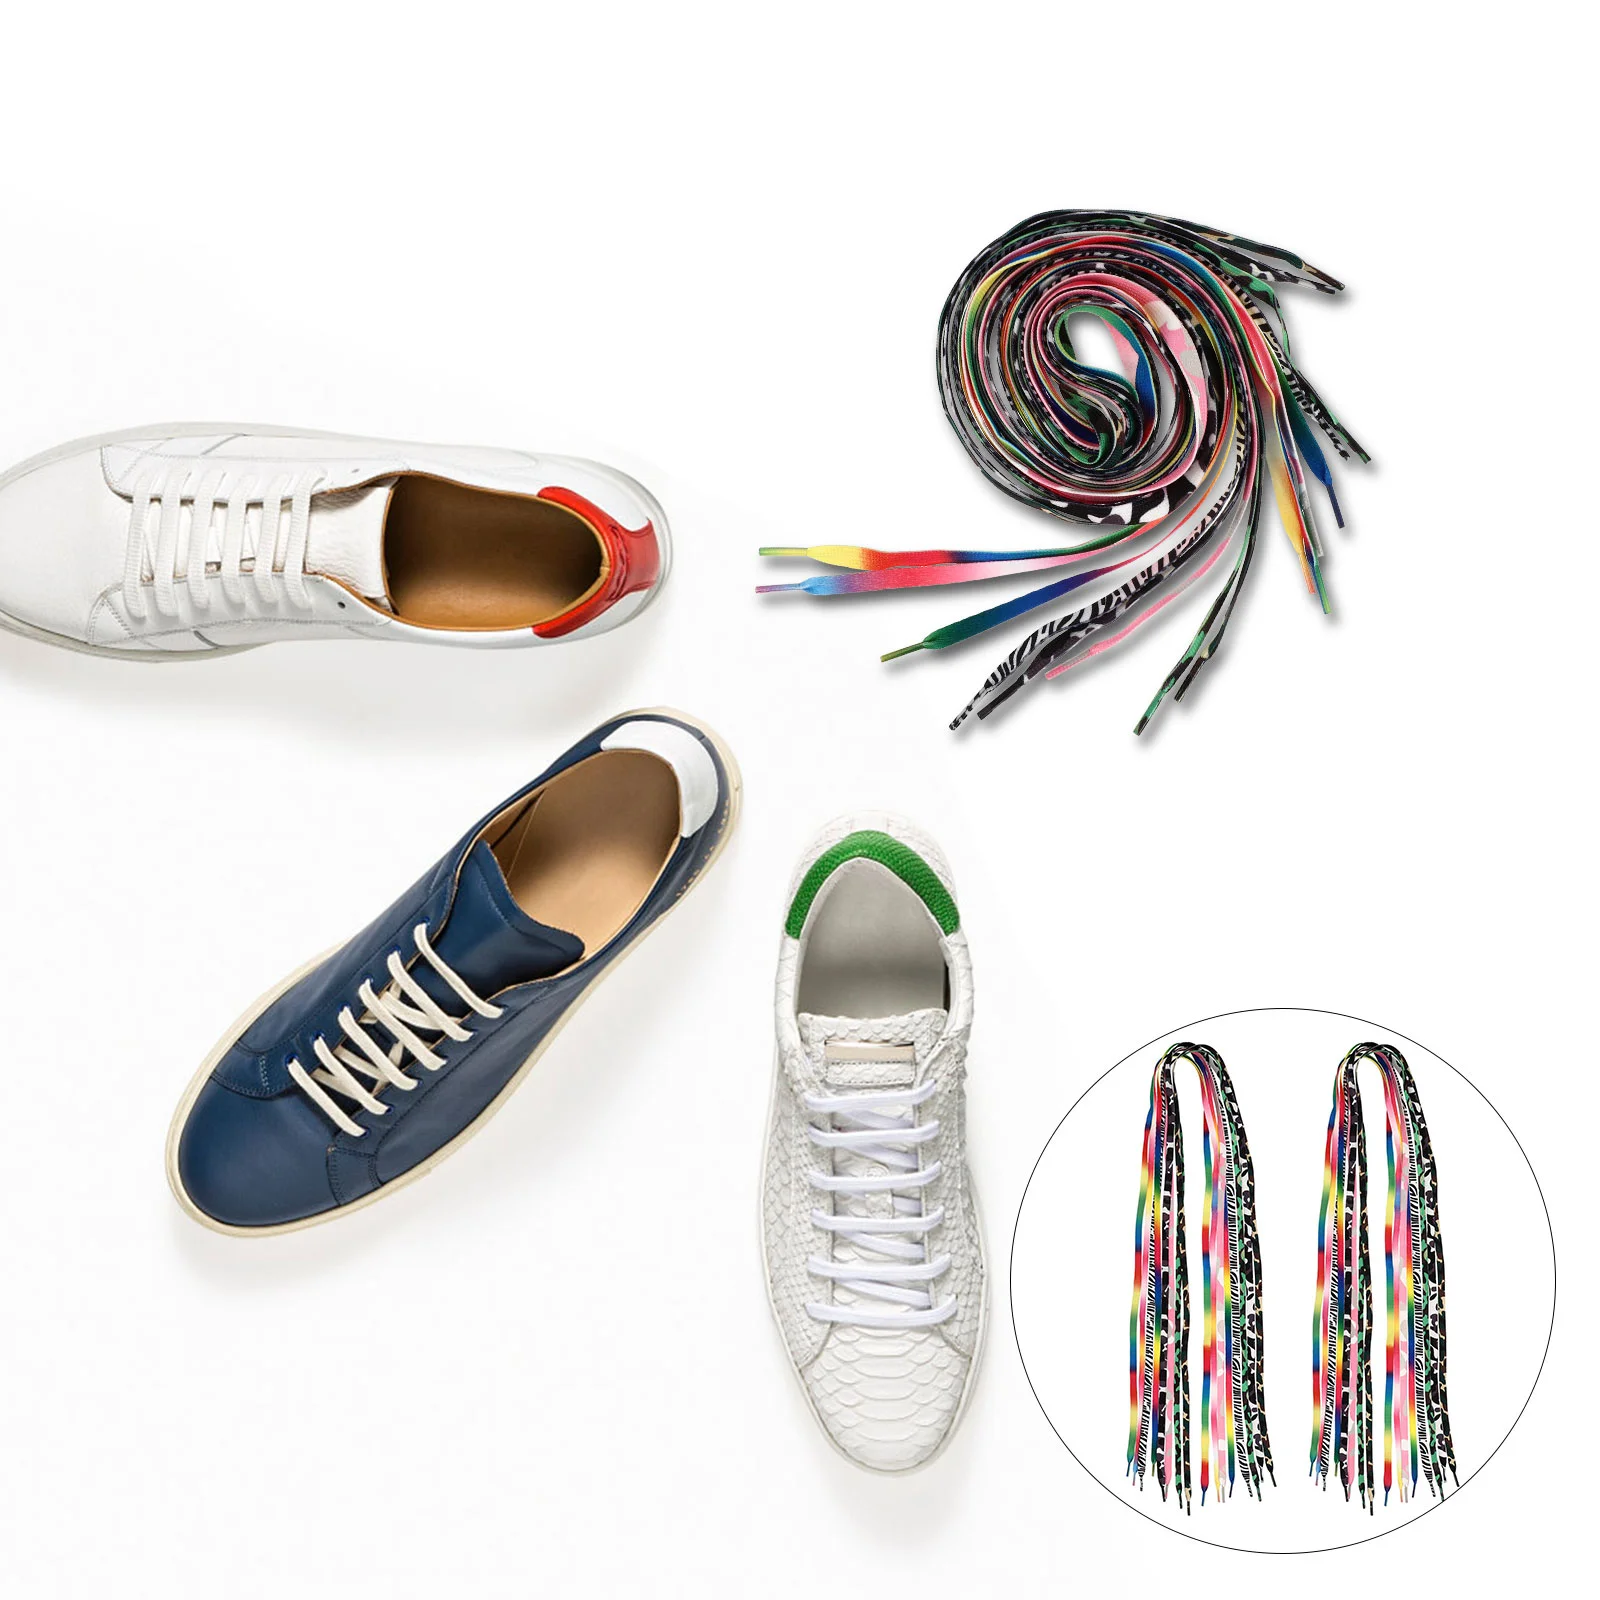 

8 Pairs of Flat Colored Shoelaces Shoe Strings for Shoes Sneakers Shoes ( 120cm )